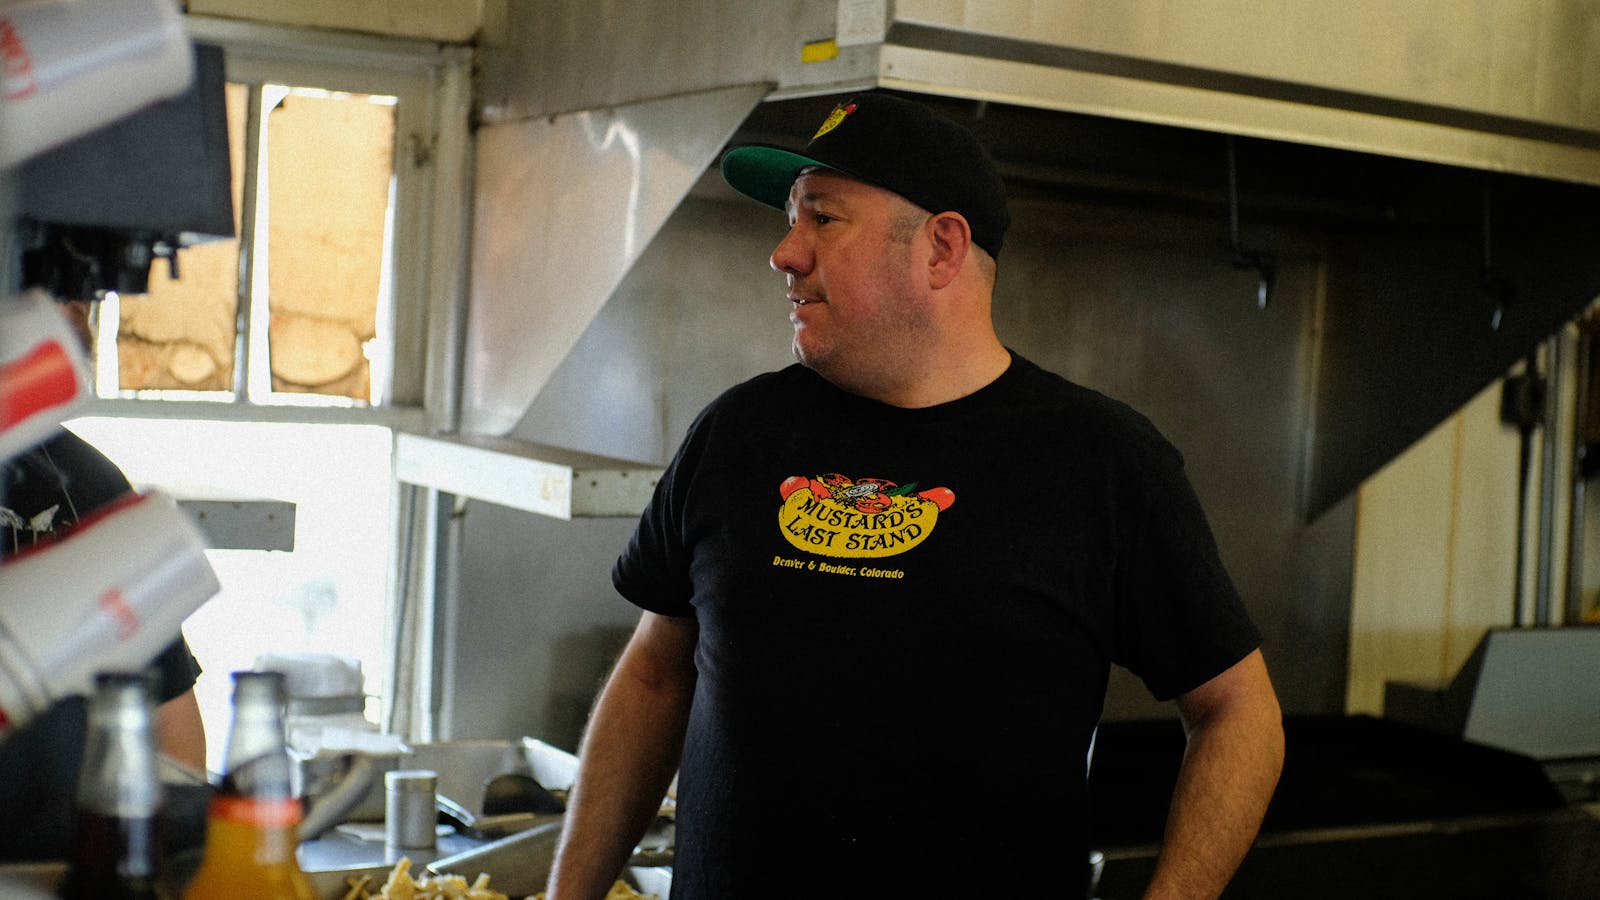 Dave Goodhart, co-owner of Mustard's Last Stand in Denver, Colorado. 